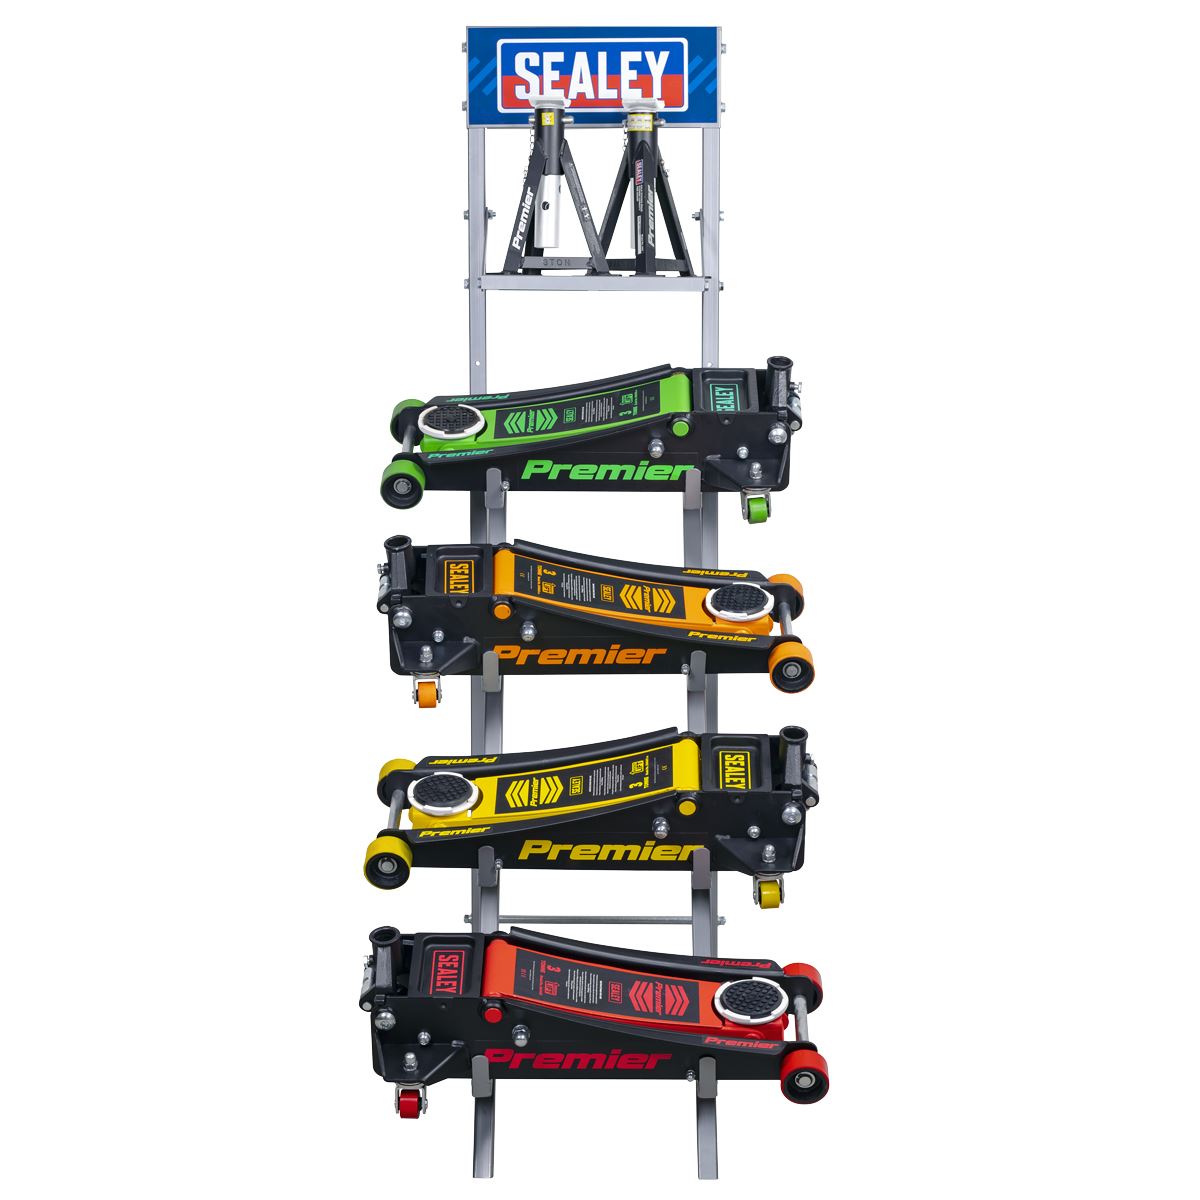 Sealey 3040 Jack Stand Deal